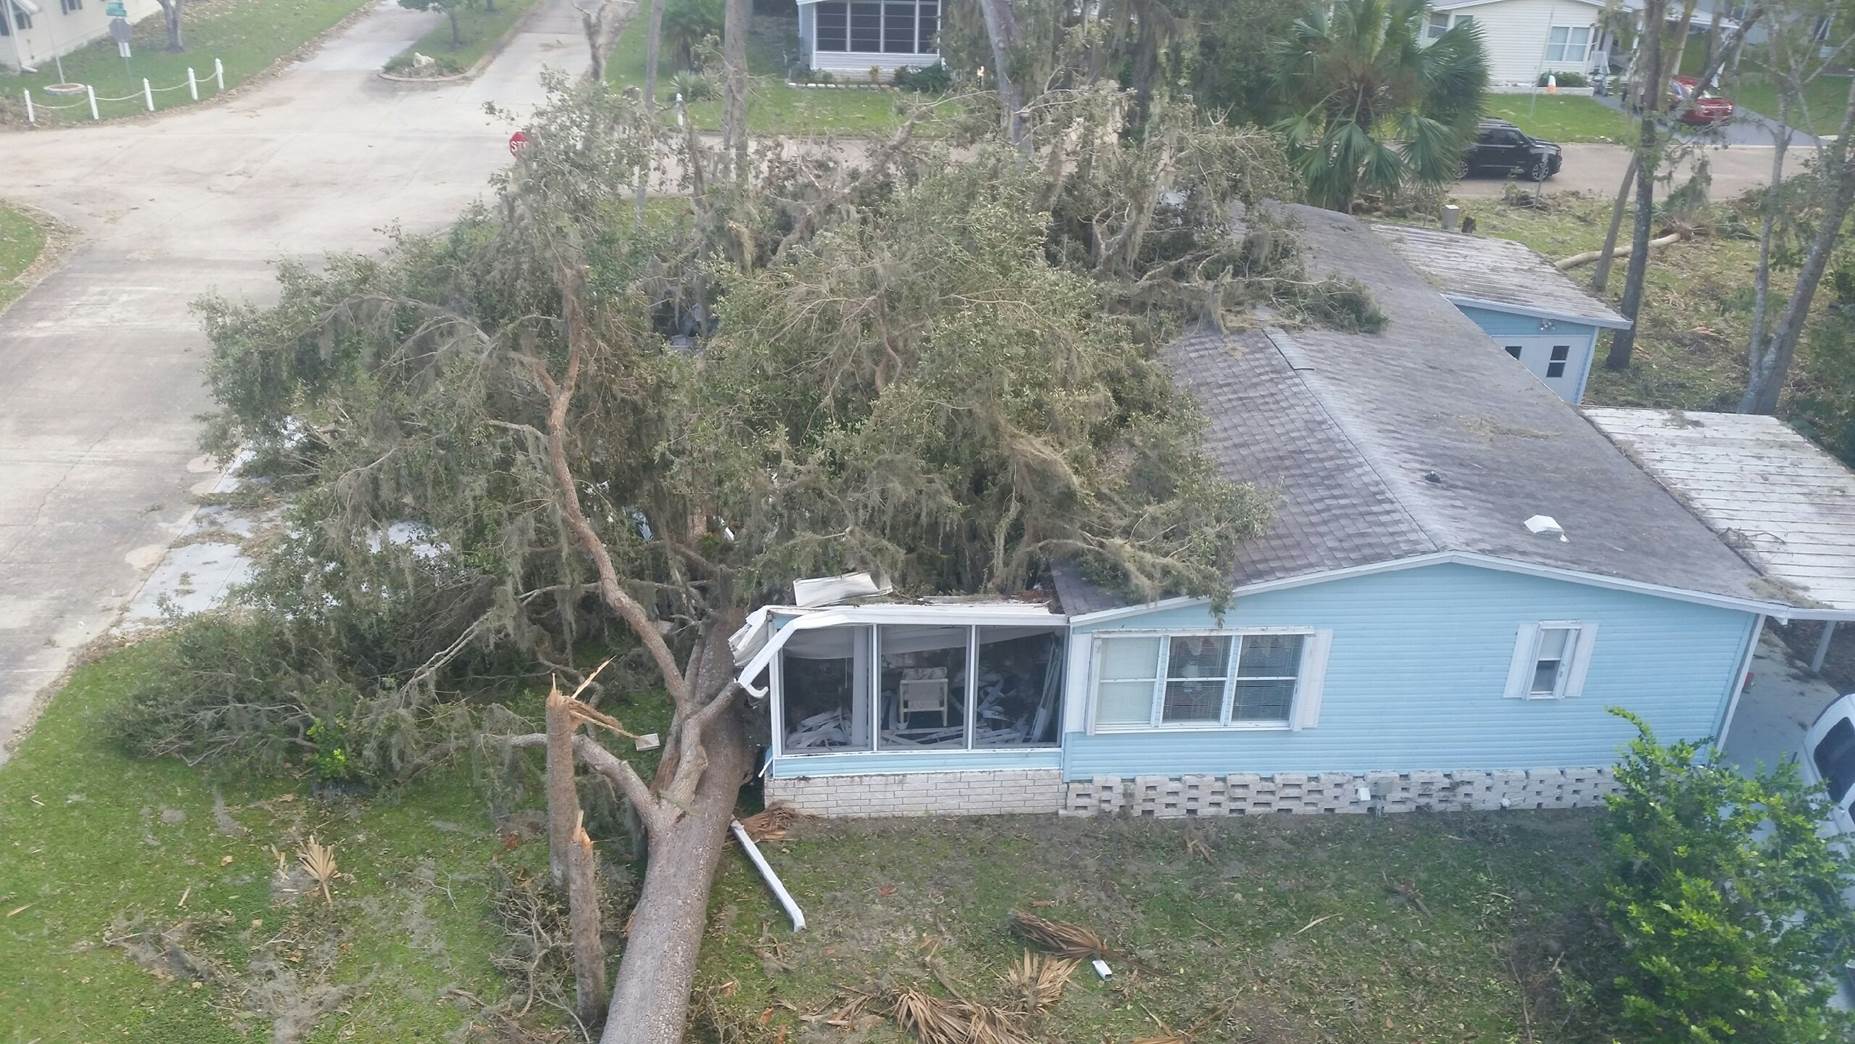 How One Manufactured Home Property Management Company Responded to Hurricane Matthew